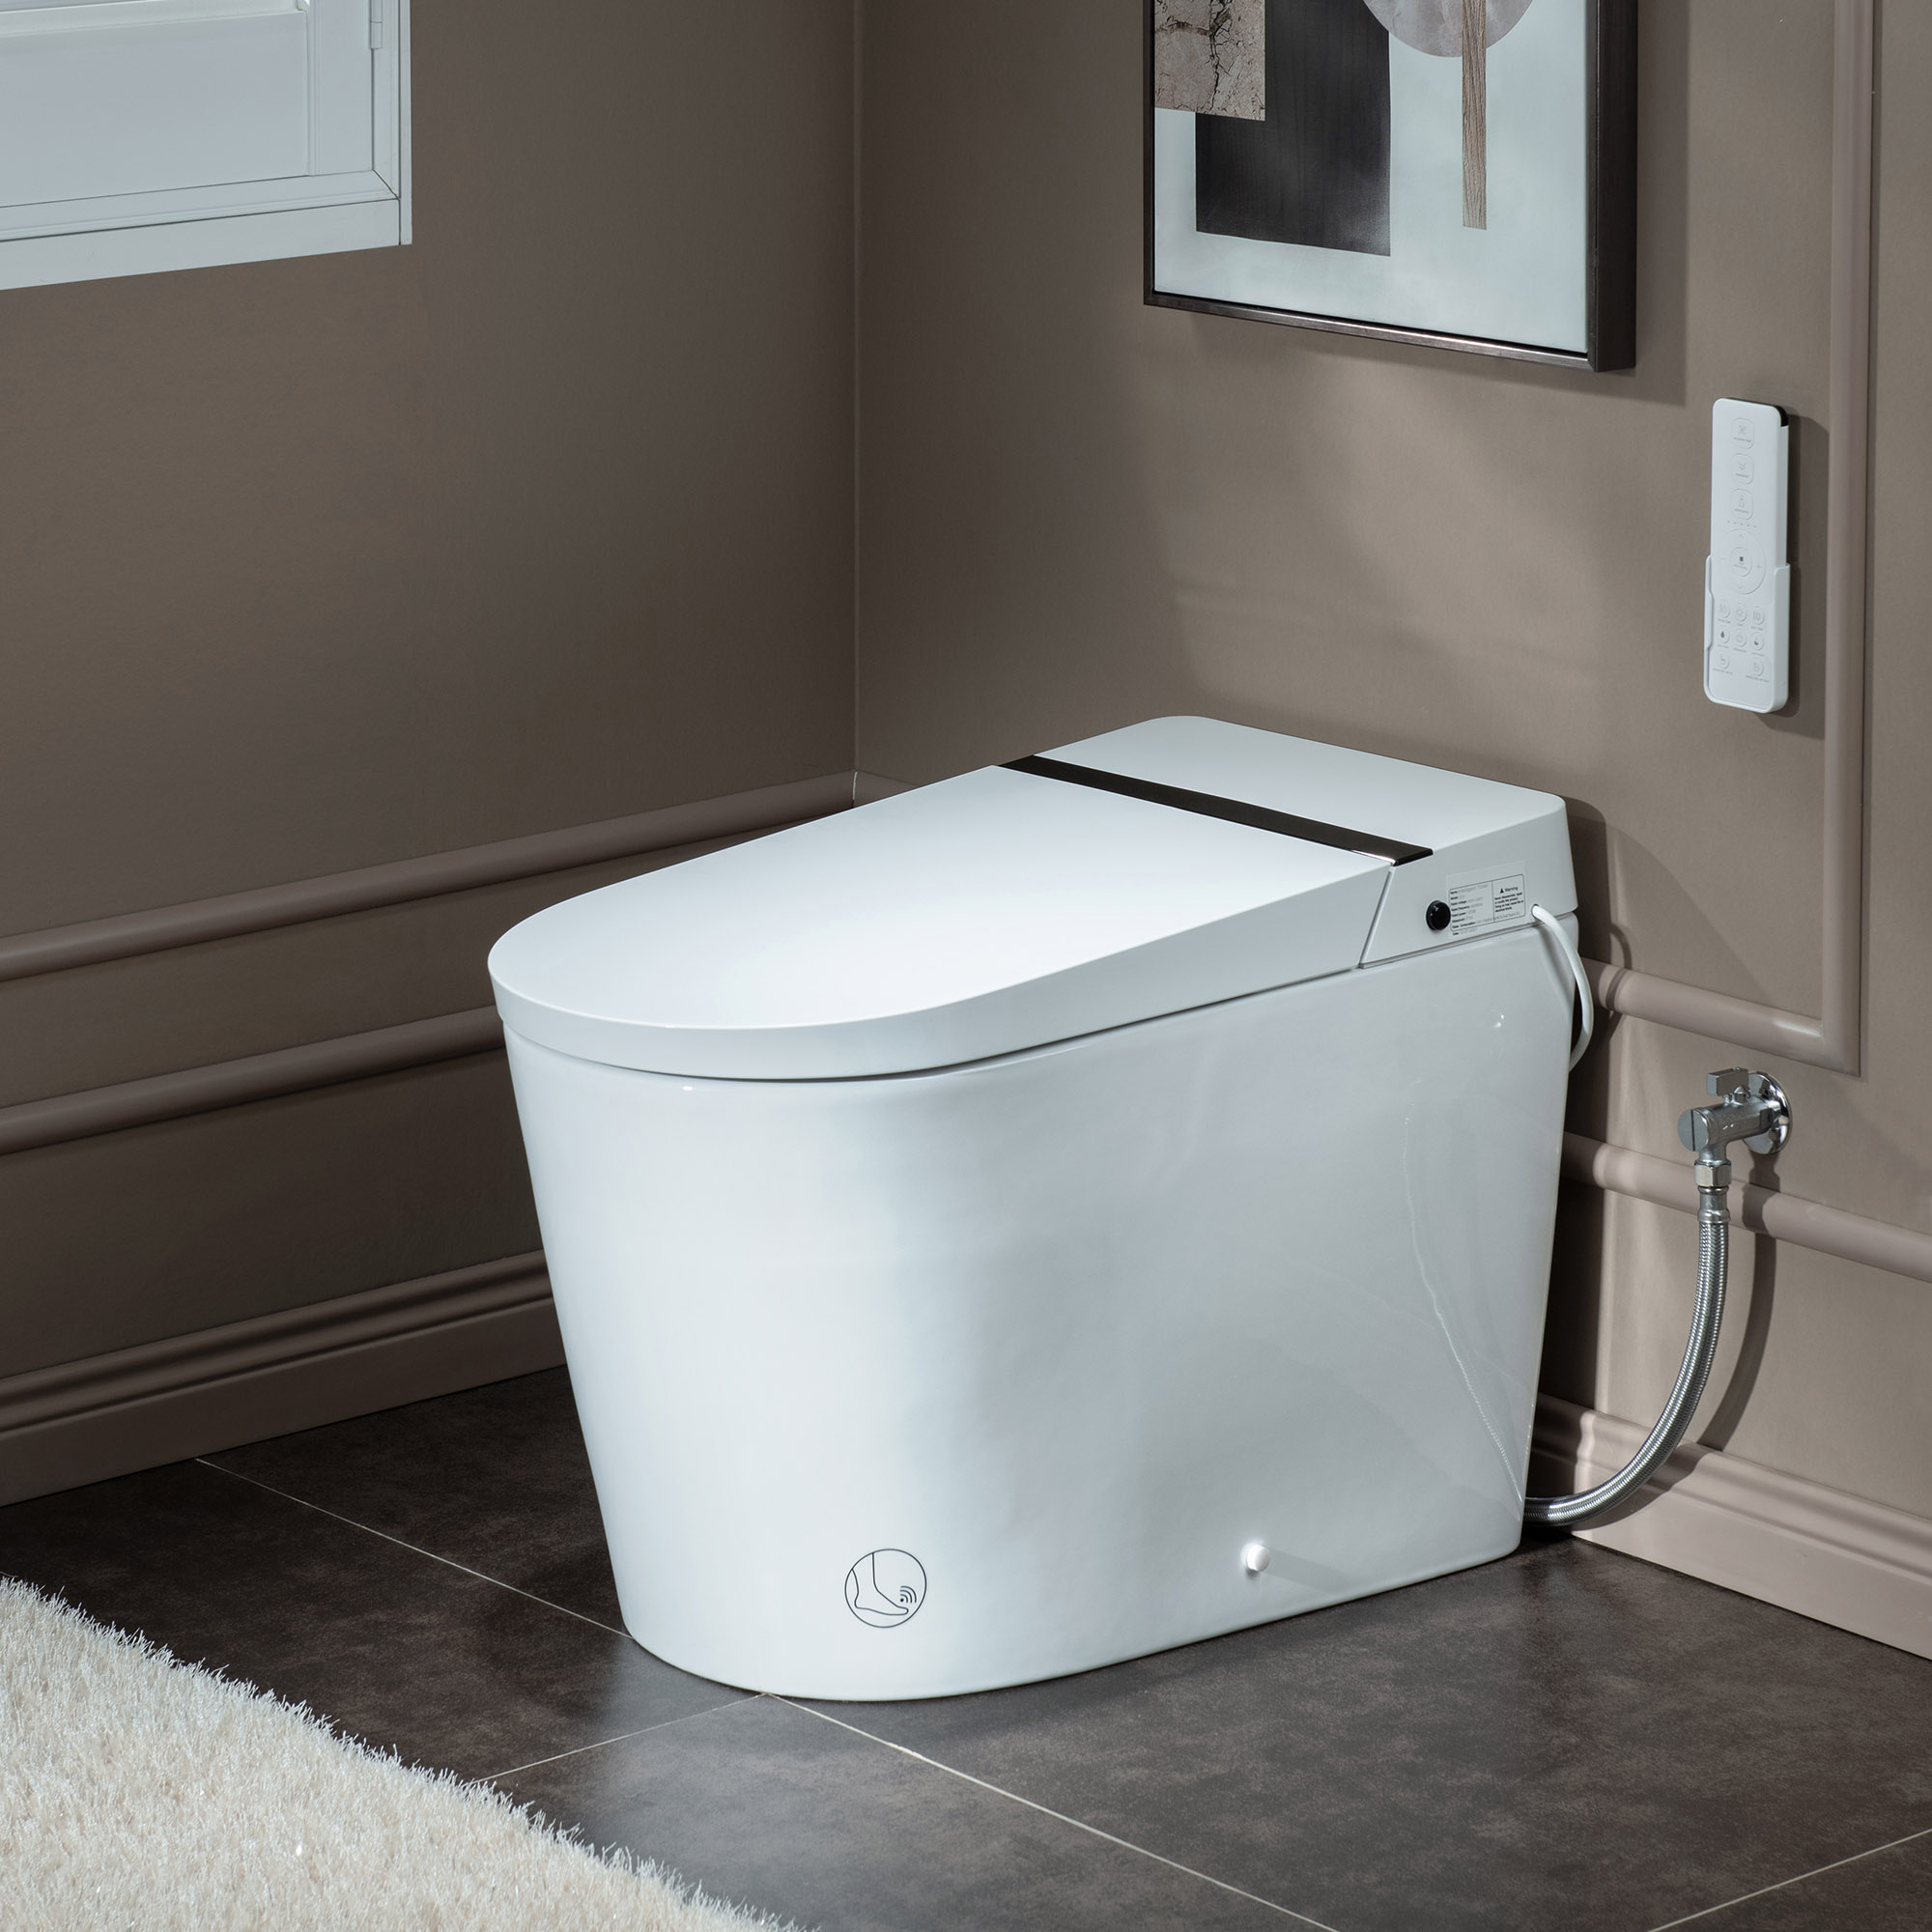  WOODBRIDGE B0990S One Piece Elongated Smart Toilet Bidet with Massage Washing, Auto Open and Close Seat and Lid, Auto Flush, Heated Seat and Integrated Multi Function Remote Control, White_2110